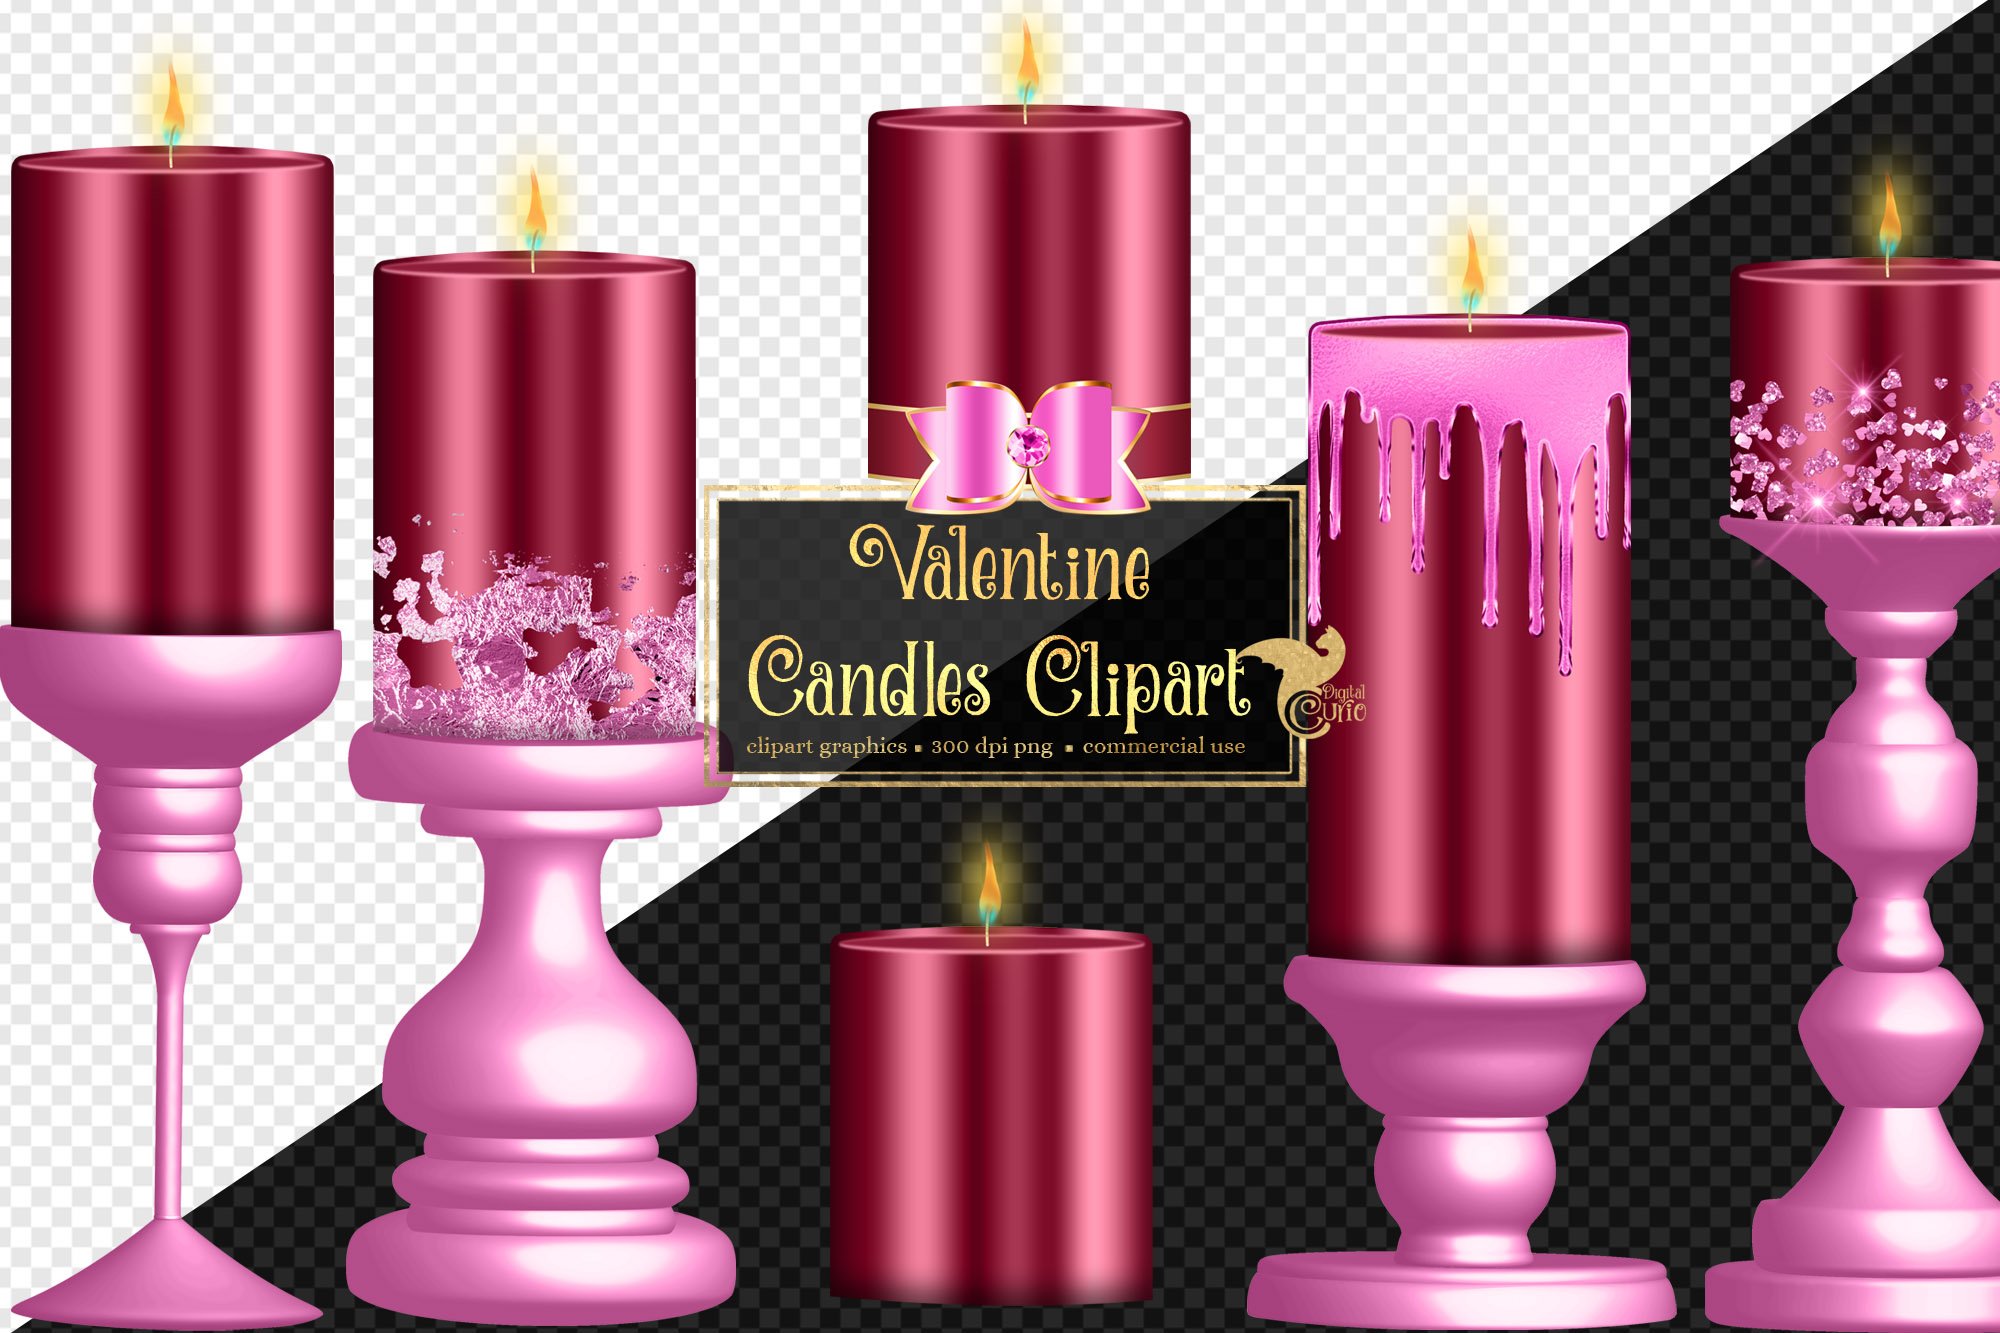 Valentine Candles Clipart preview image.